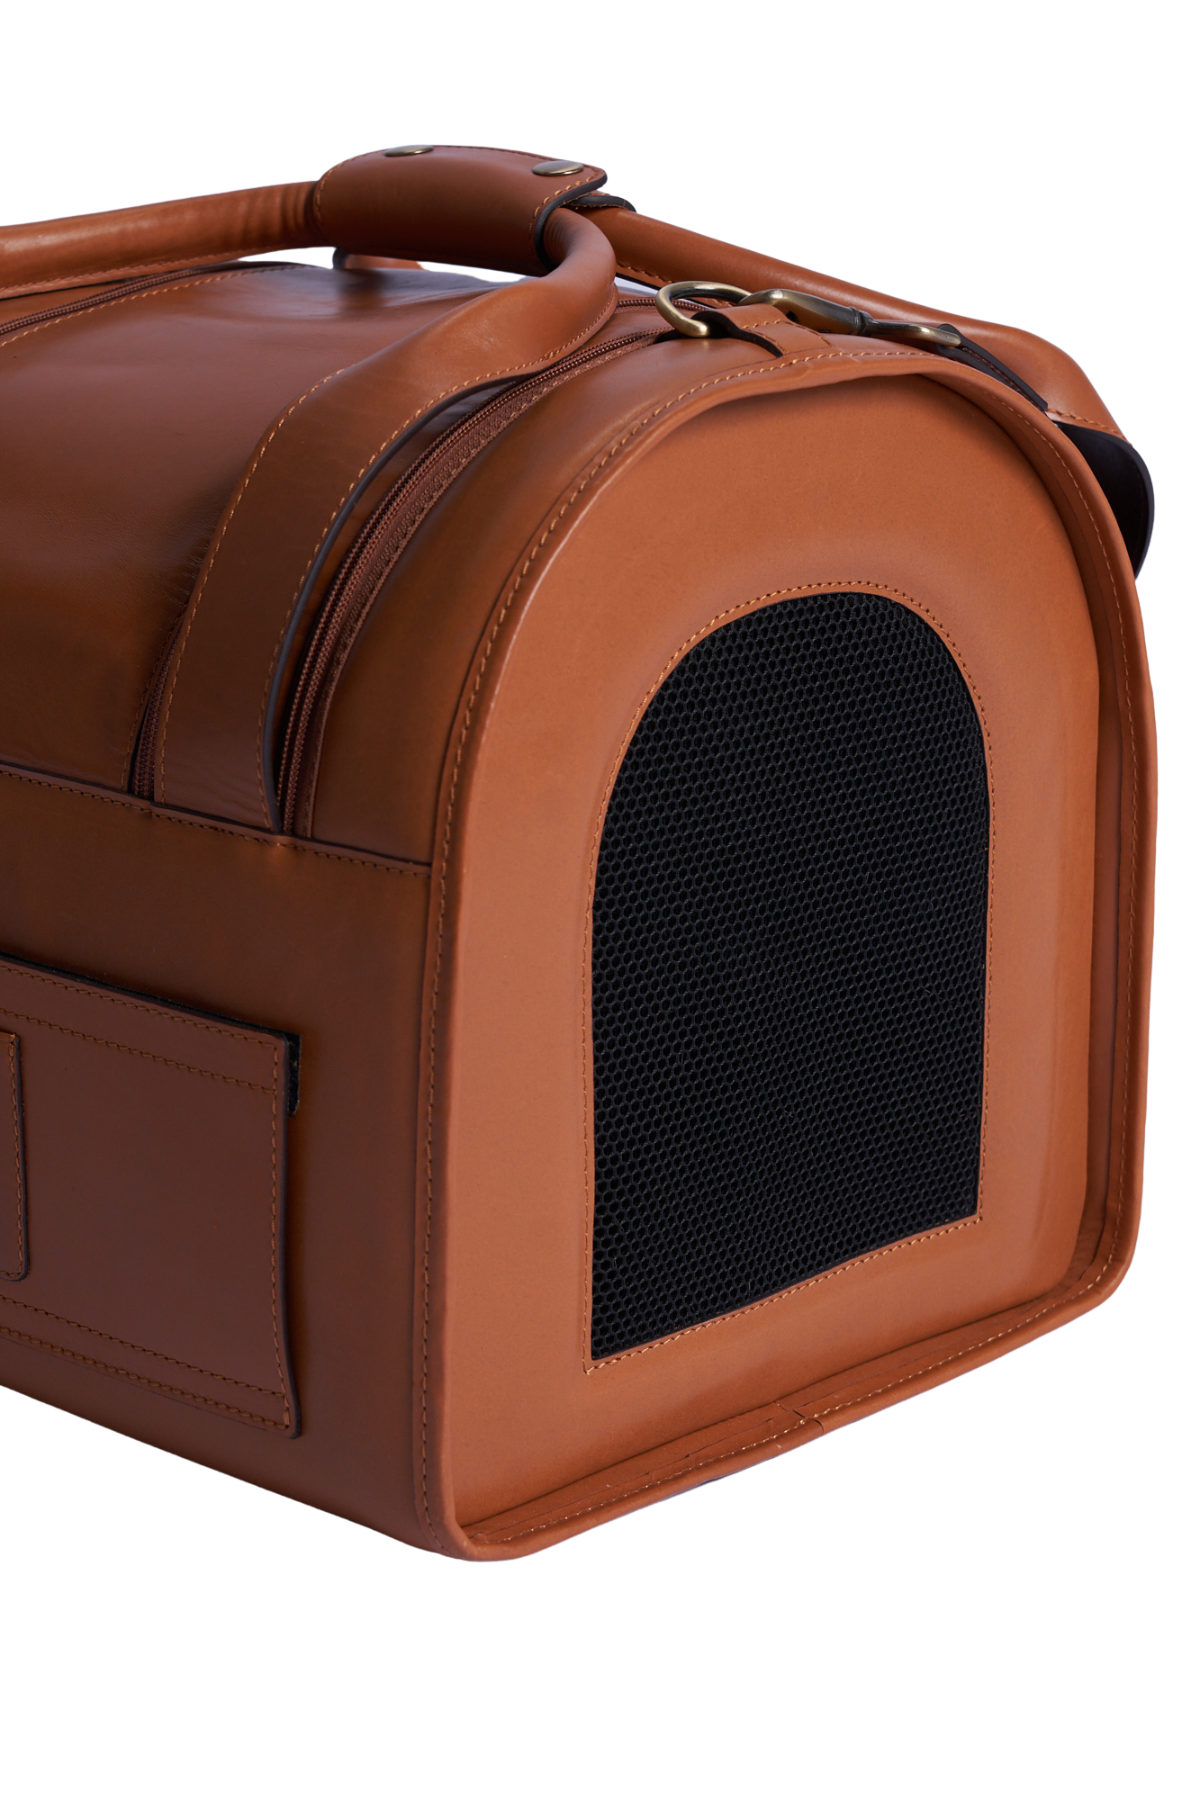 Leather Travel Pet Carrier/ Nest